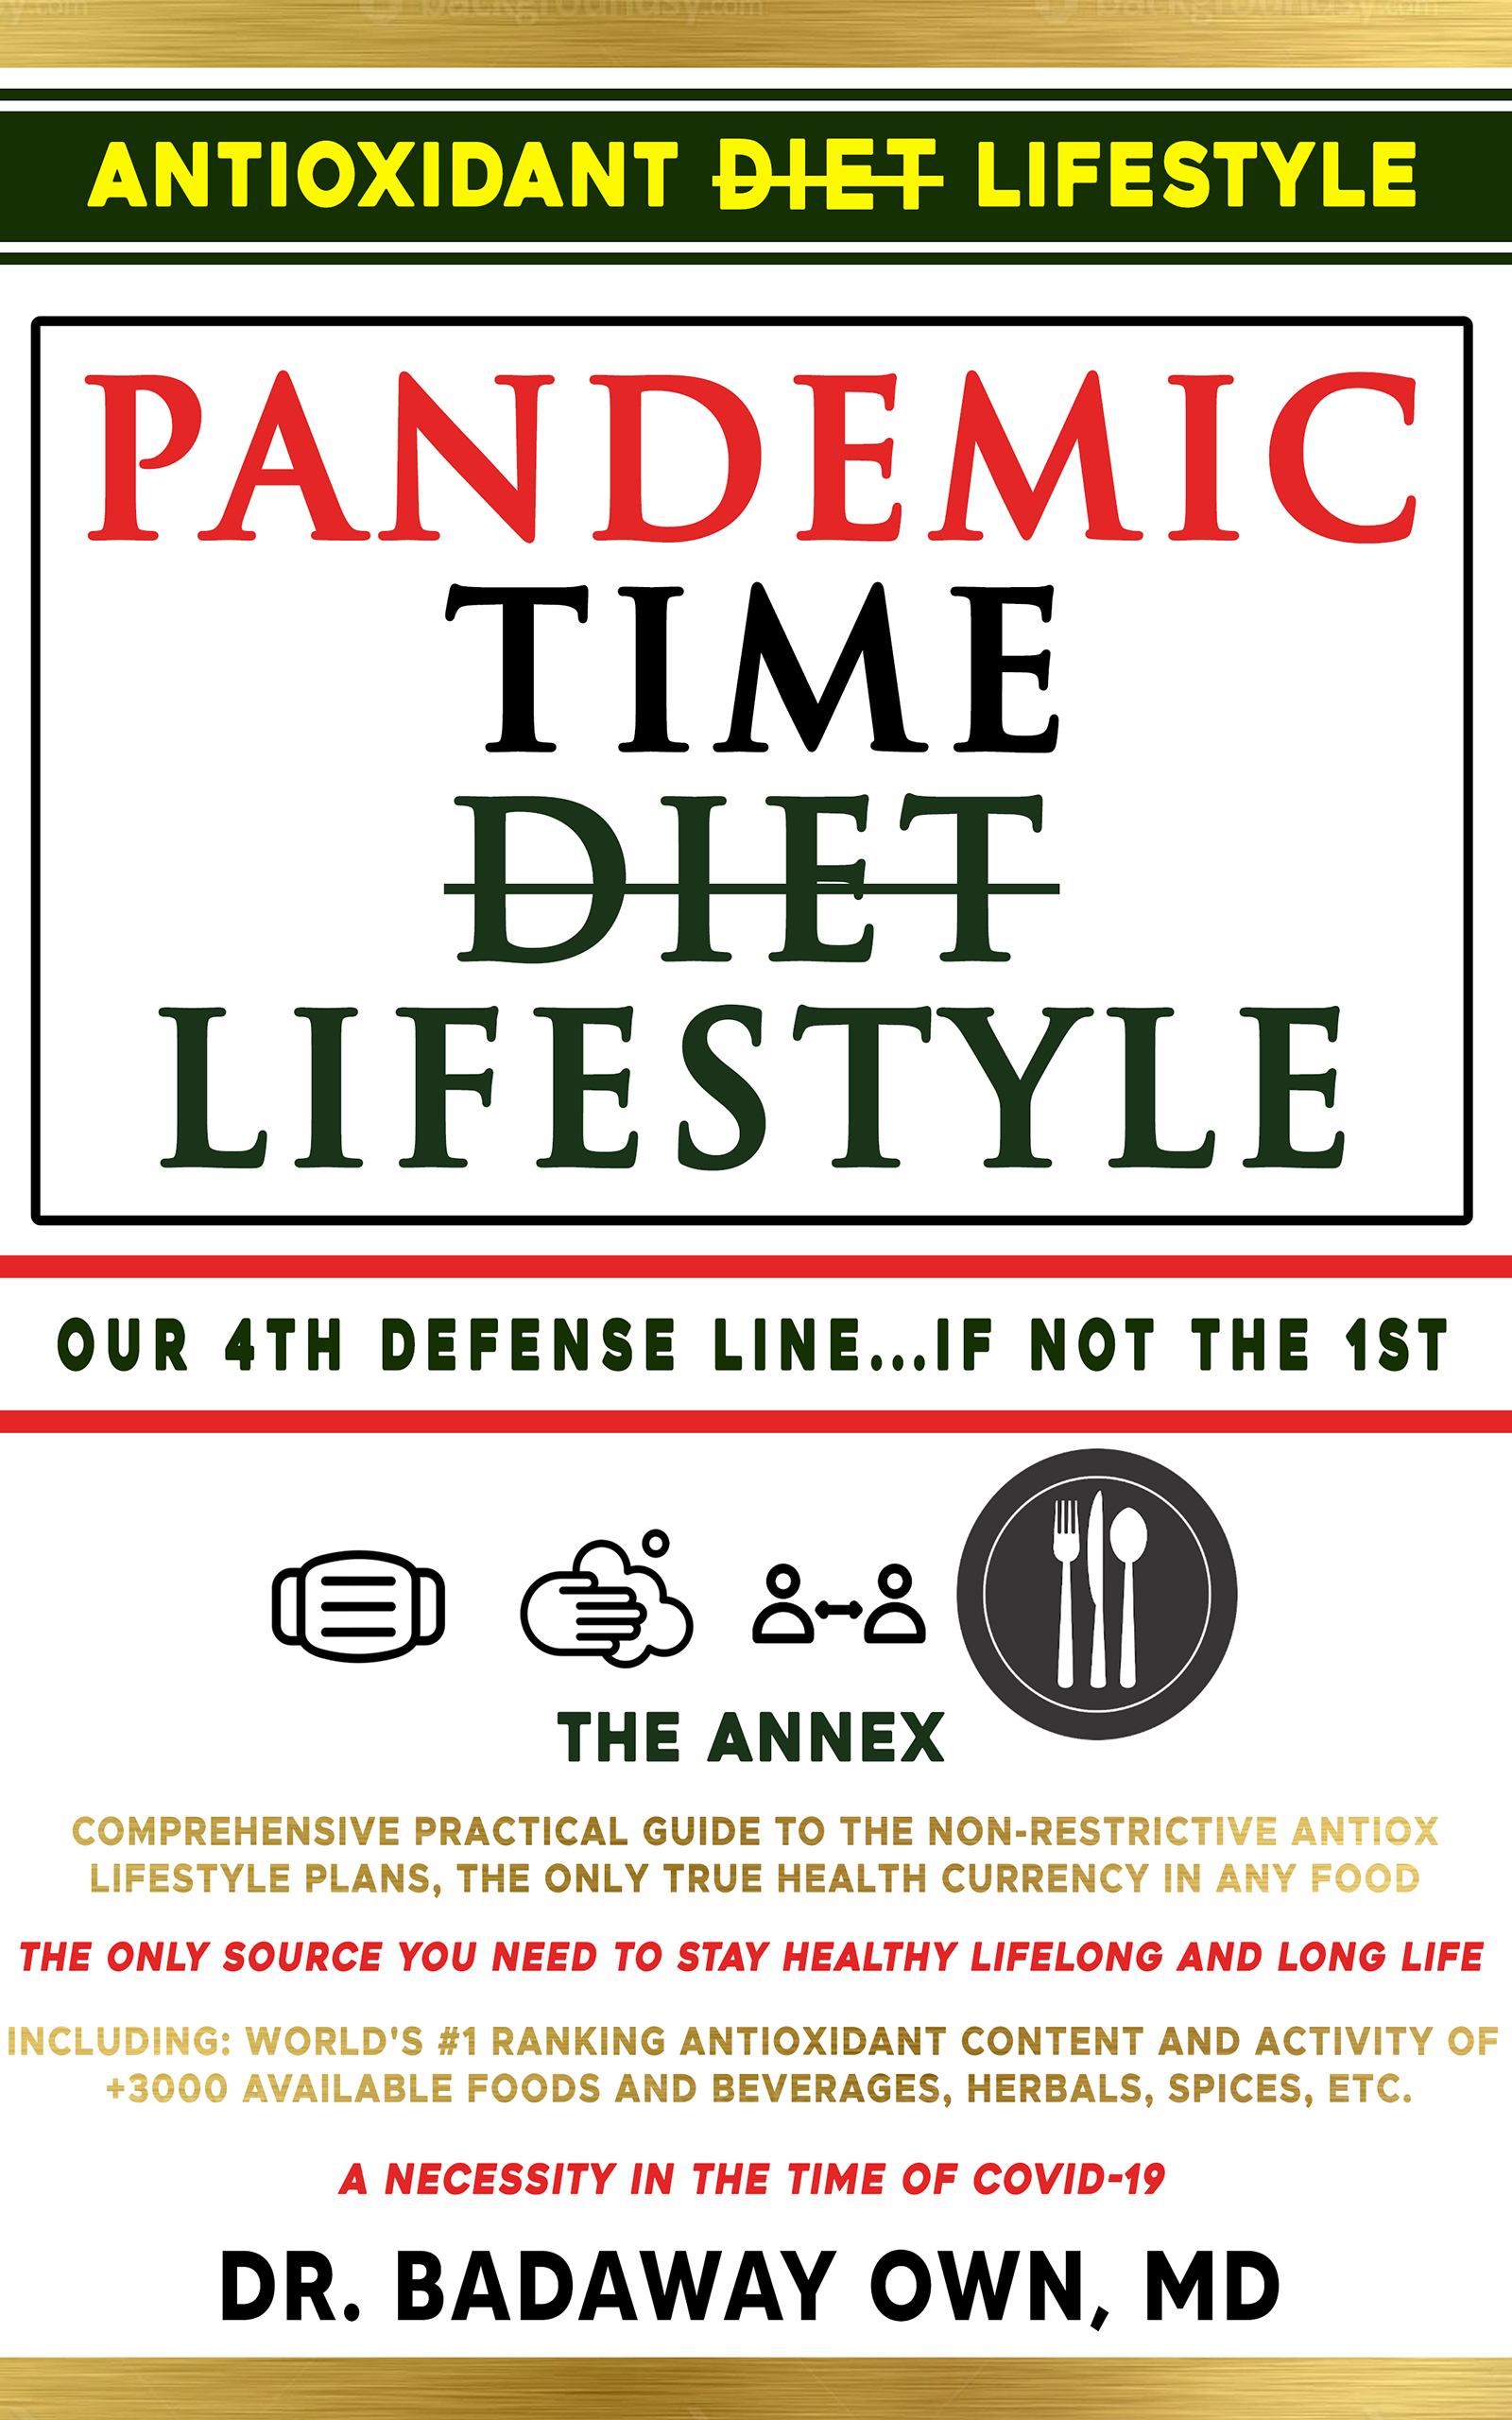 FREE: PANDEMIC TIME DIET, OUR 4TH DEFENSE LINE, ANTIOXIDANT-BASED (ANTIOX) LIFESTYLE by Dr Badaway Own, M.D.